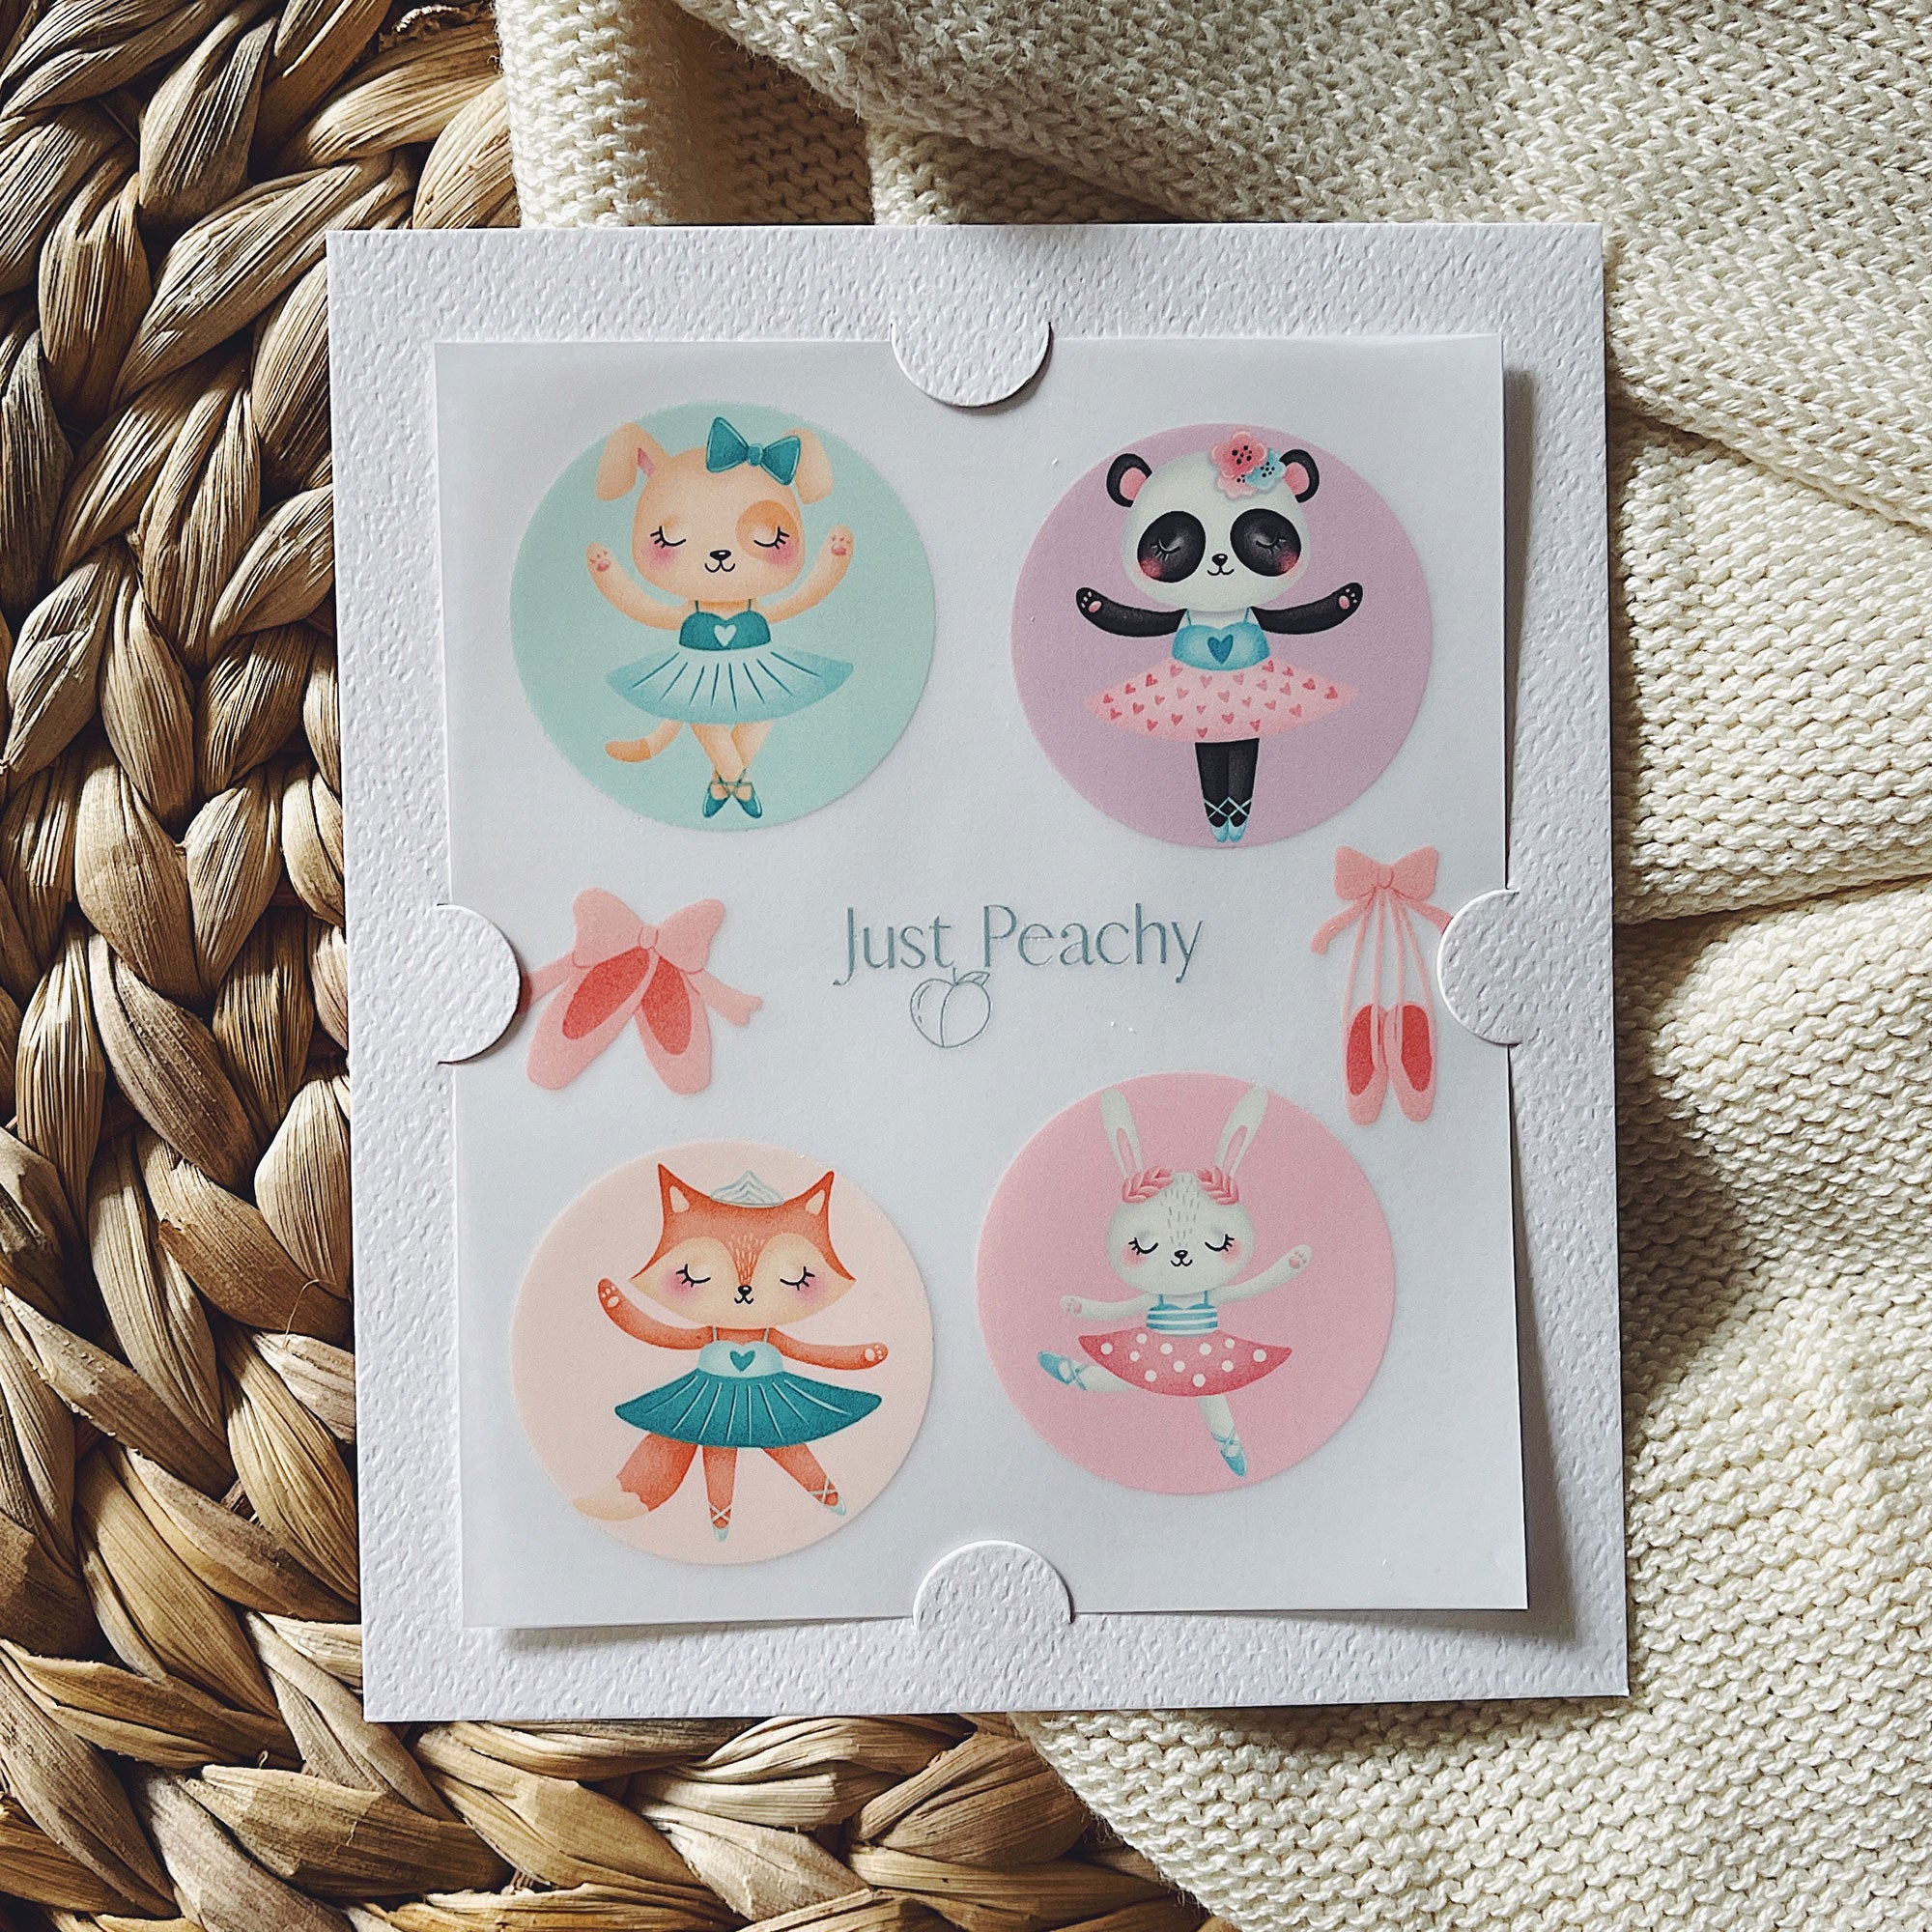 Feel Good Holiday Children's Gift Set (Pre-Order) – Just Peachy